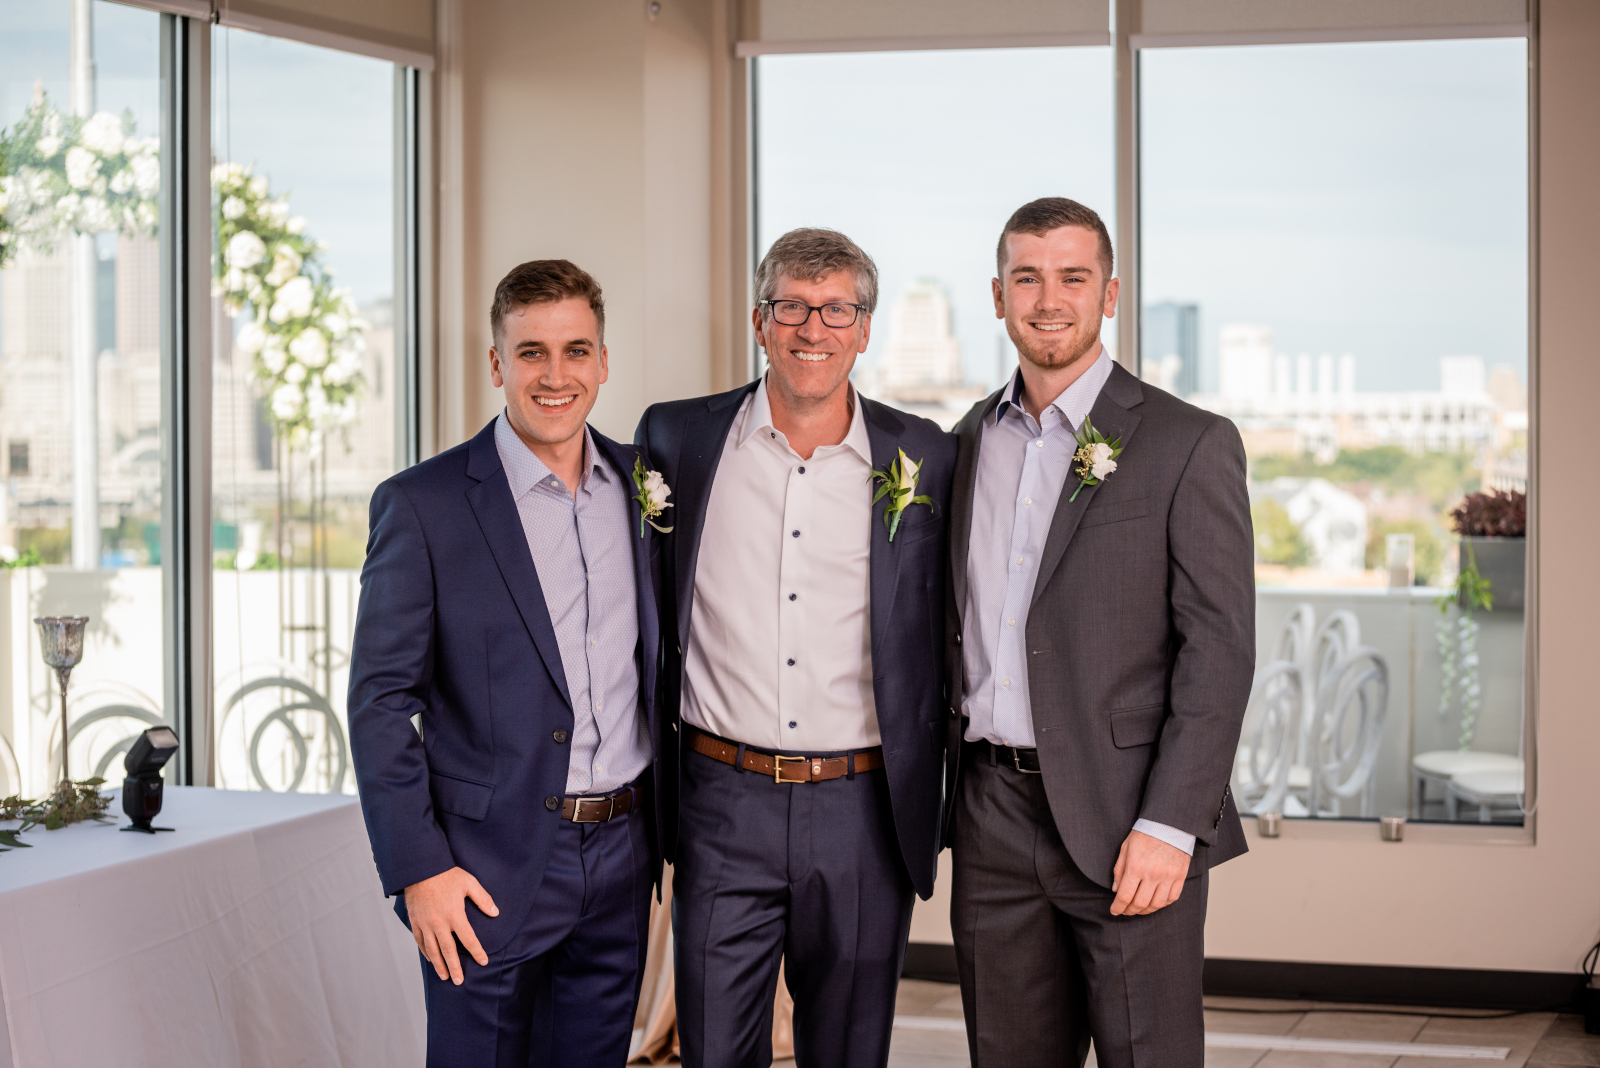 Groom with sons, groomsmen, bridal party portrait, small bridal party, older couple, romantic outdoor urban wedding ceremony at Penthouse Events, Ohio City, Cleveland Flats